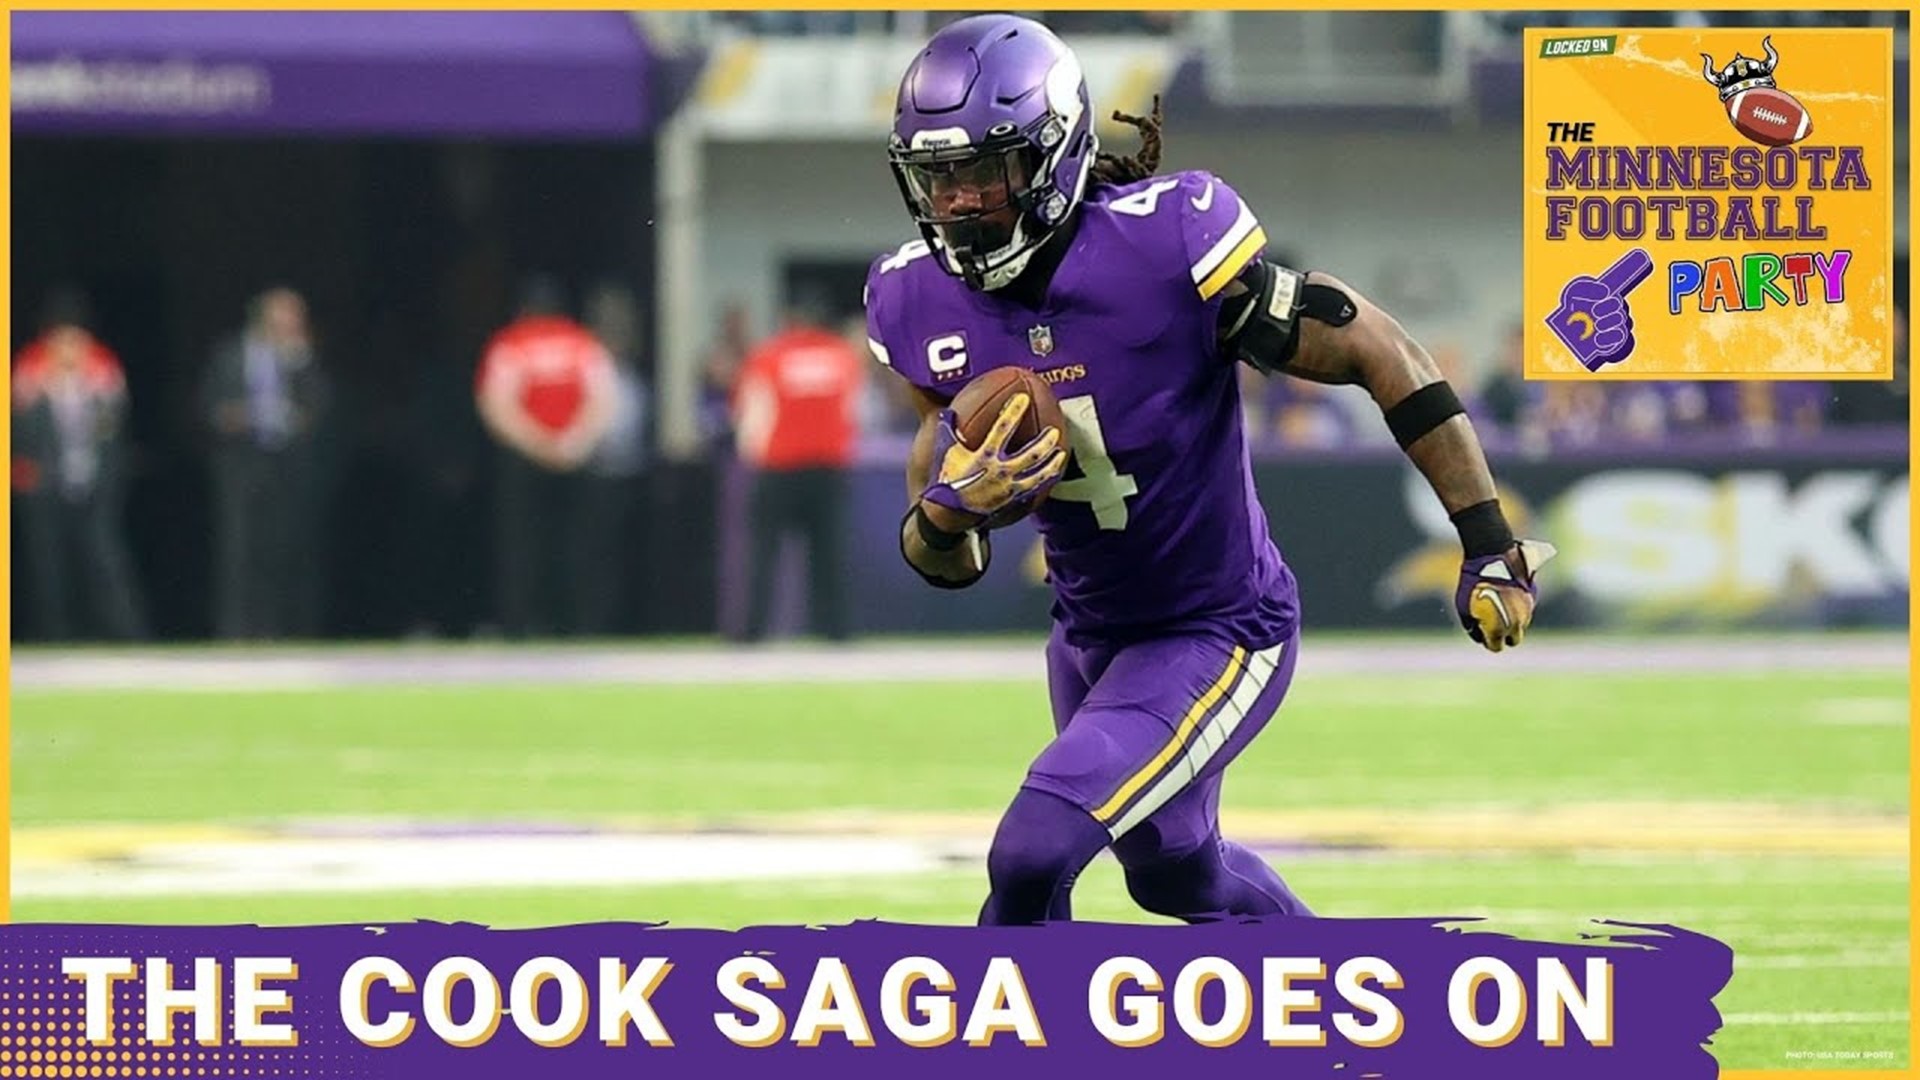 The Dalvin Cook Soap Opera Continues For the Minnesota Vikings - The Minnesota Football Party